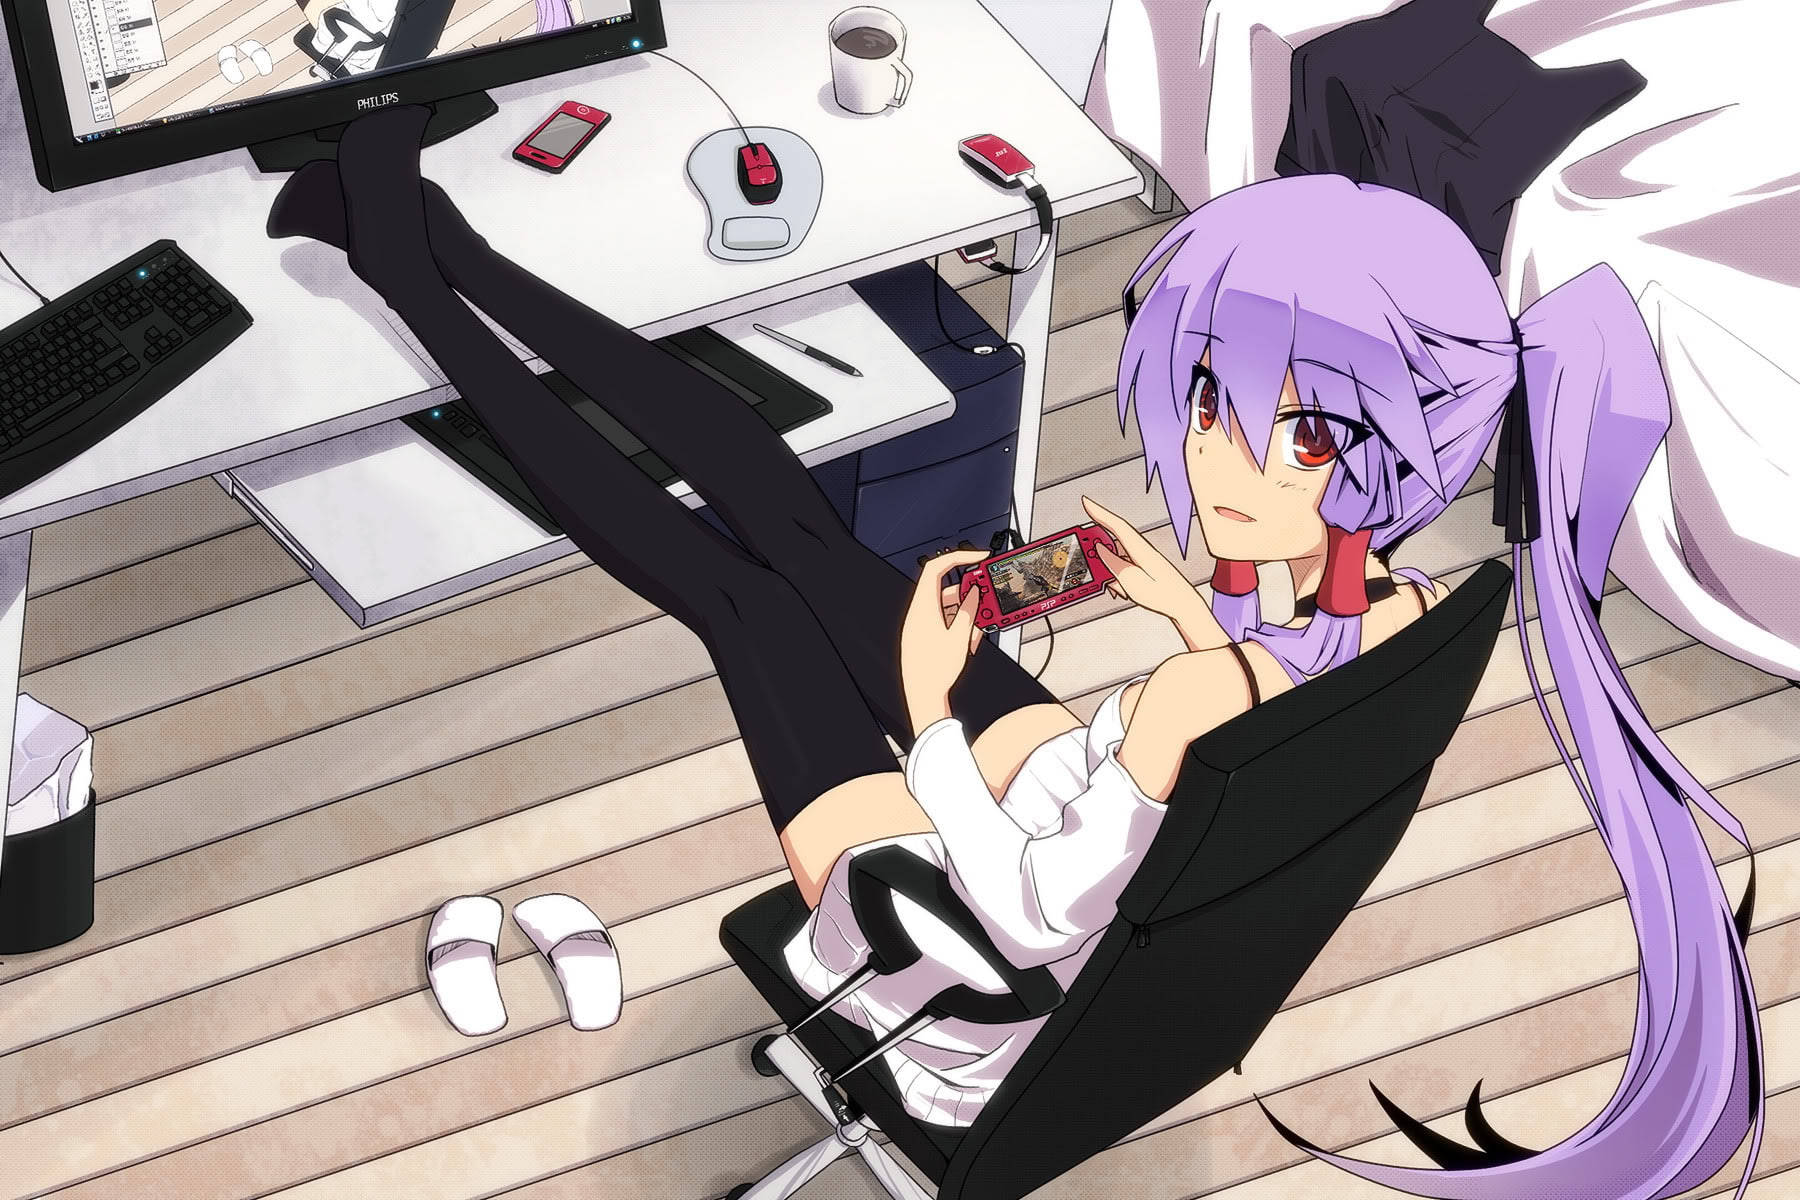 Psp Anime Girl Playing By Desk Background